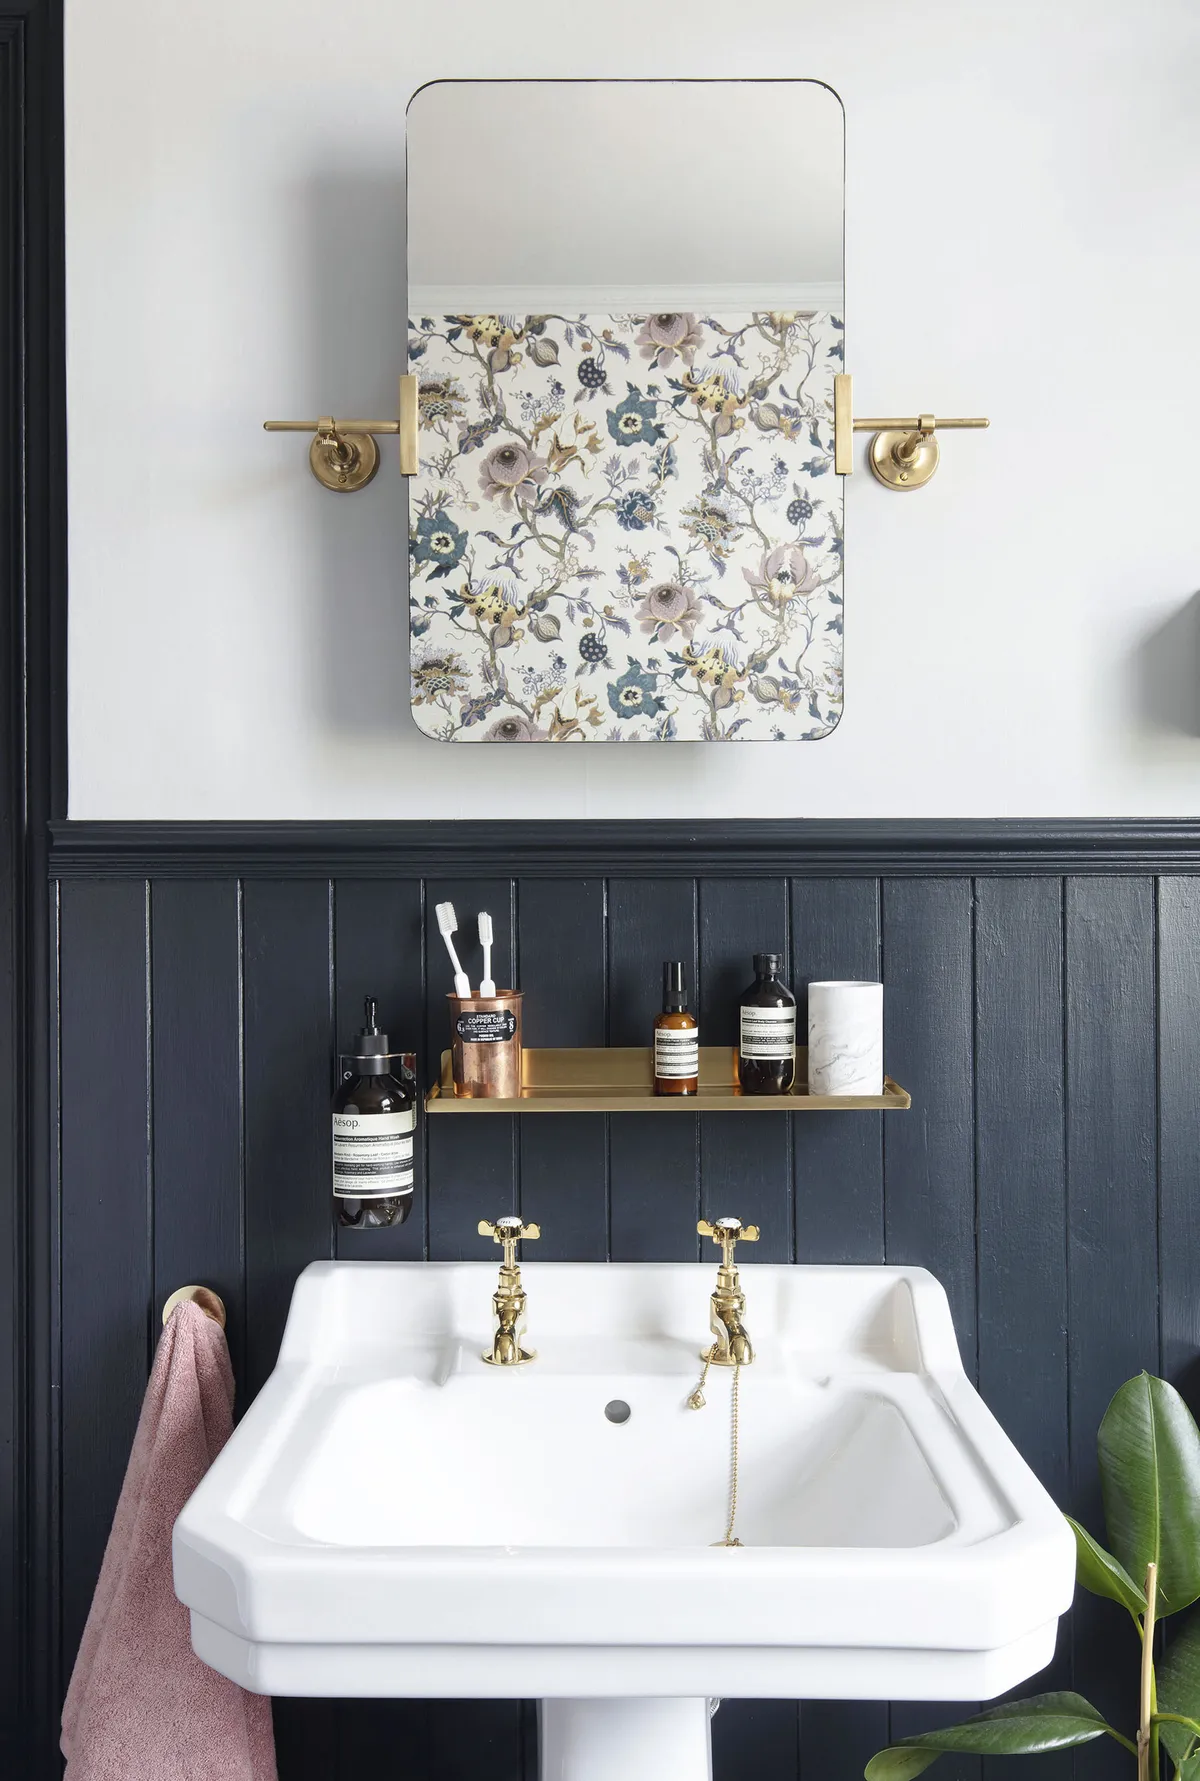 Emma has lifted her dark colour palette with pops of metallic, including these classic-look brushed brass taps. The floating shelf is a handy place for the couple’s toiletries and keeps the sink clutter-free